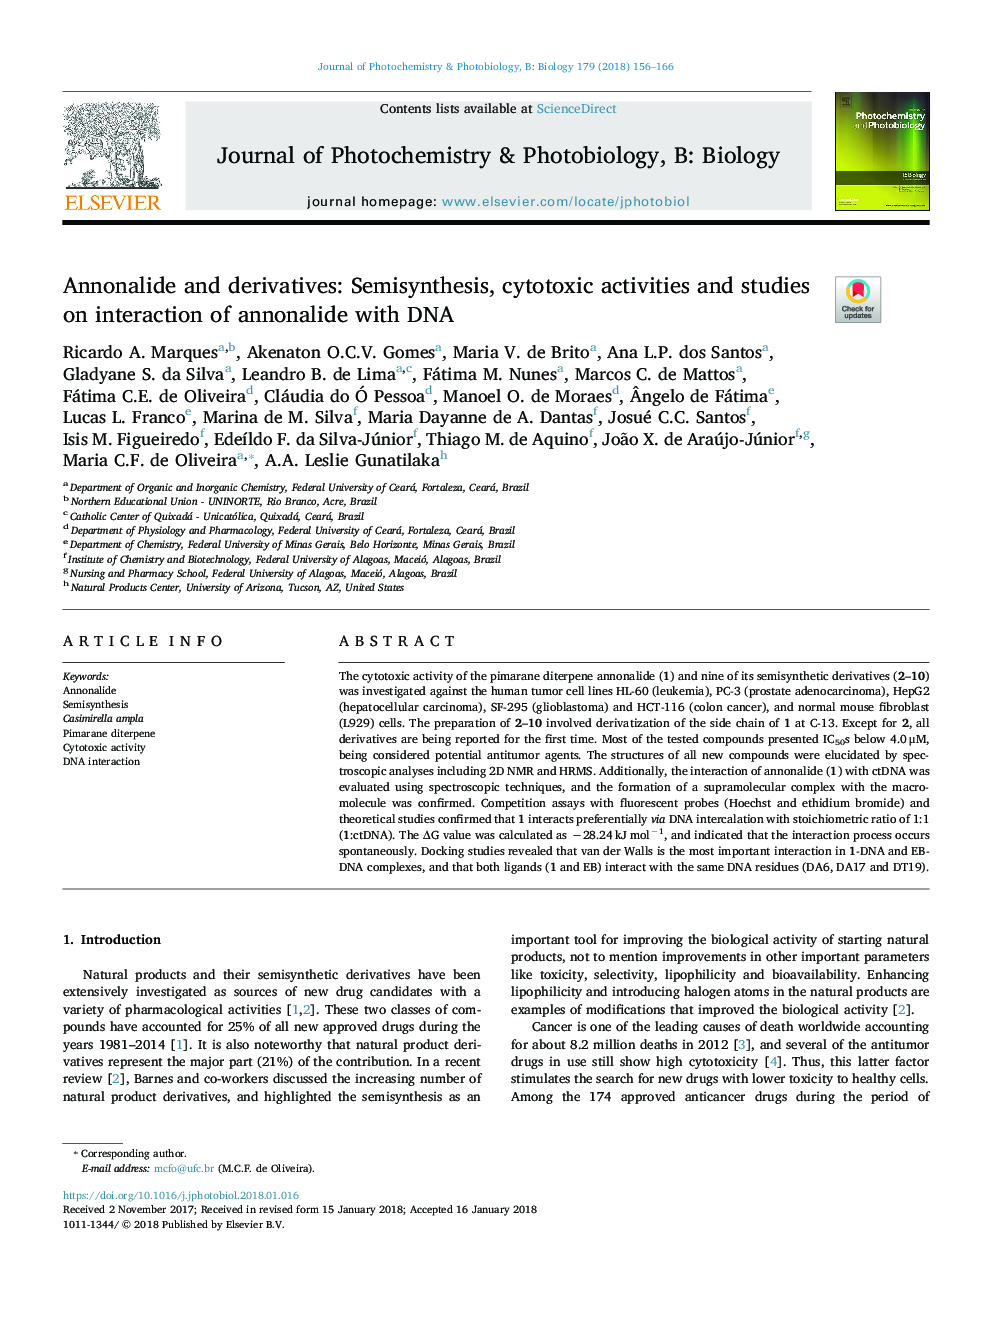 Annonalide and derivatives: Semisynthesis, cytotoxic activities and studies on interaction of annonalide with DNA